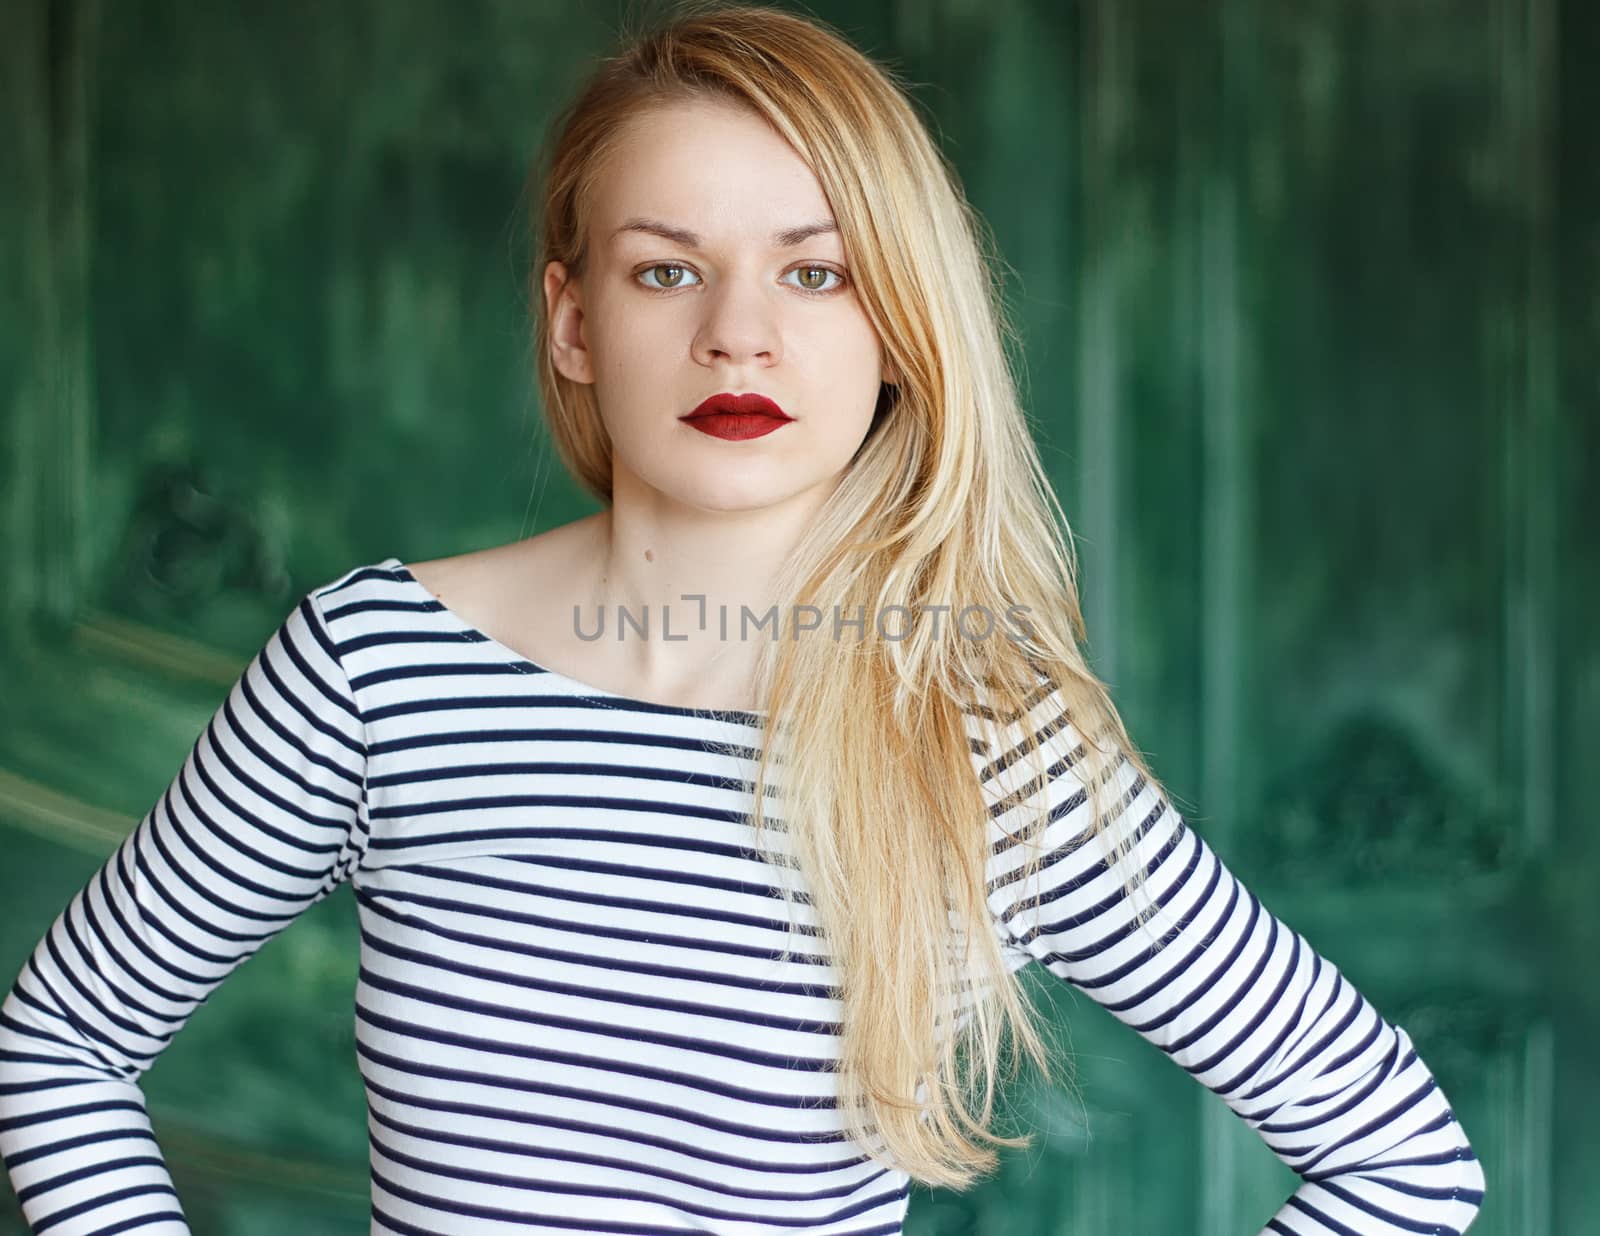 Blonde with red lips in a striped shirt on a green background a grunge wall